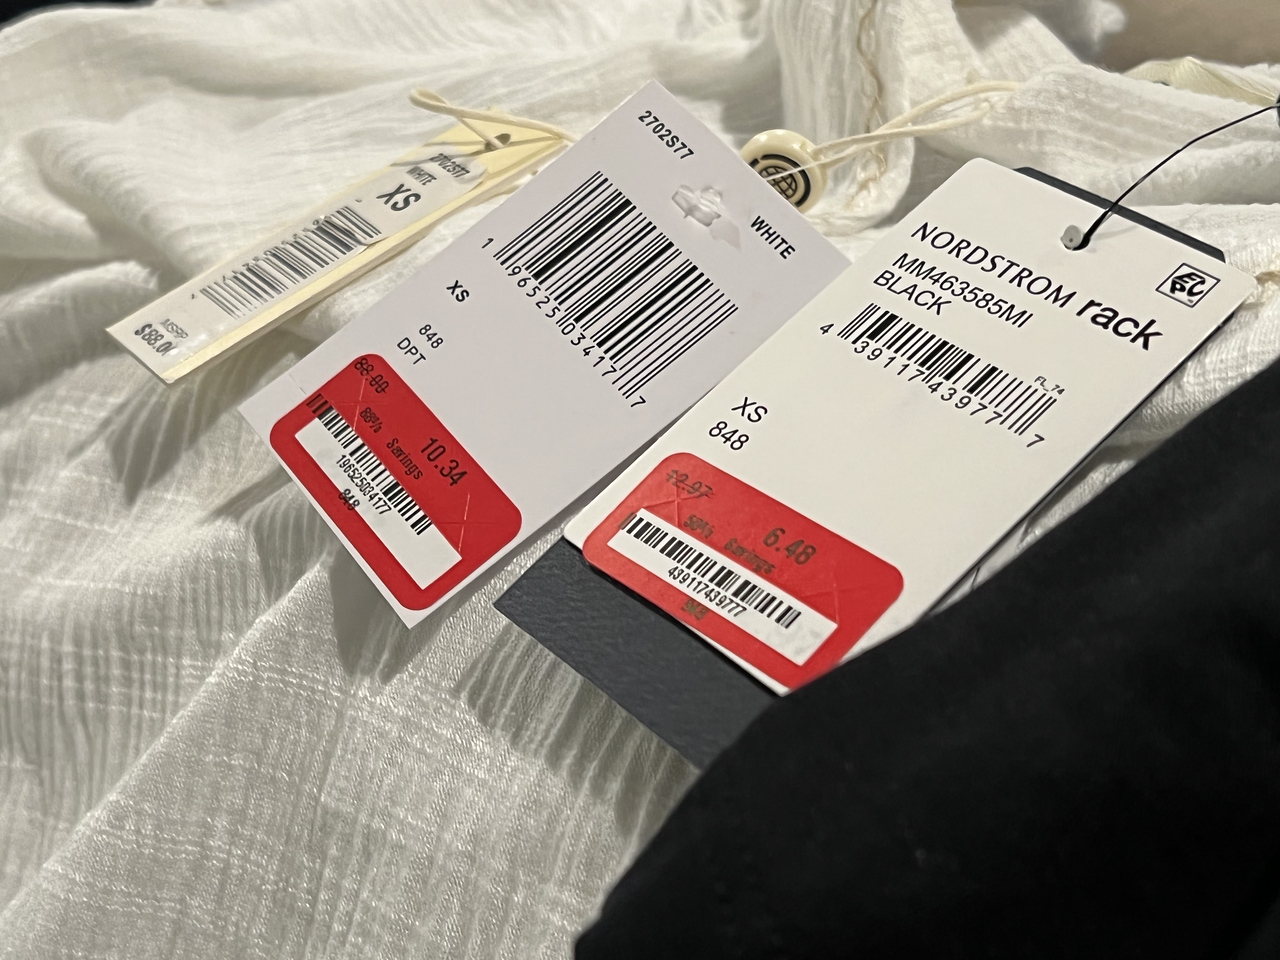 When Is The Next Nordstrom Rack Clear The Rack Sale? - SHEfinds